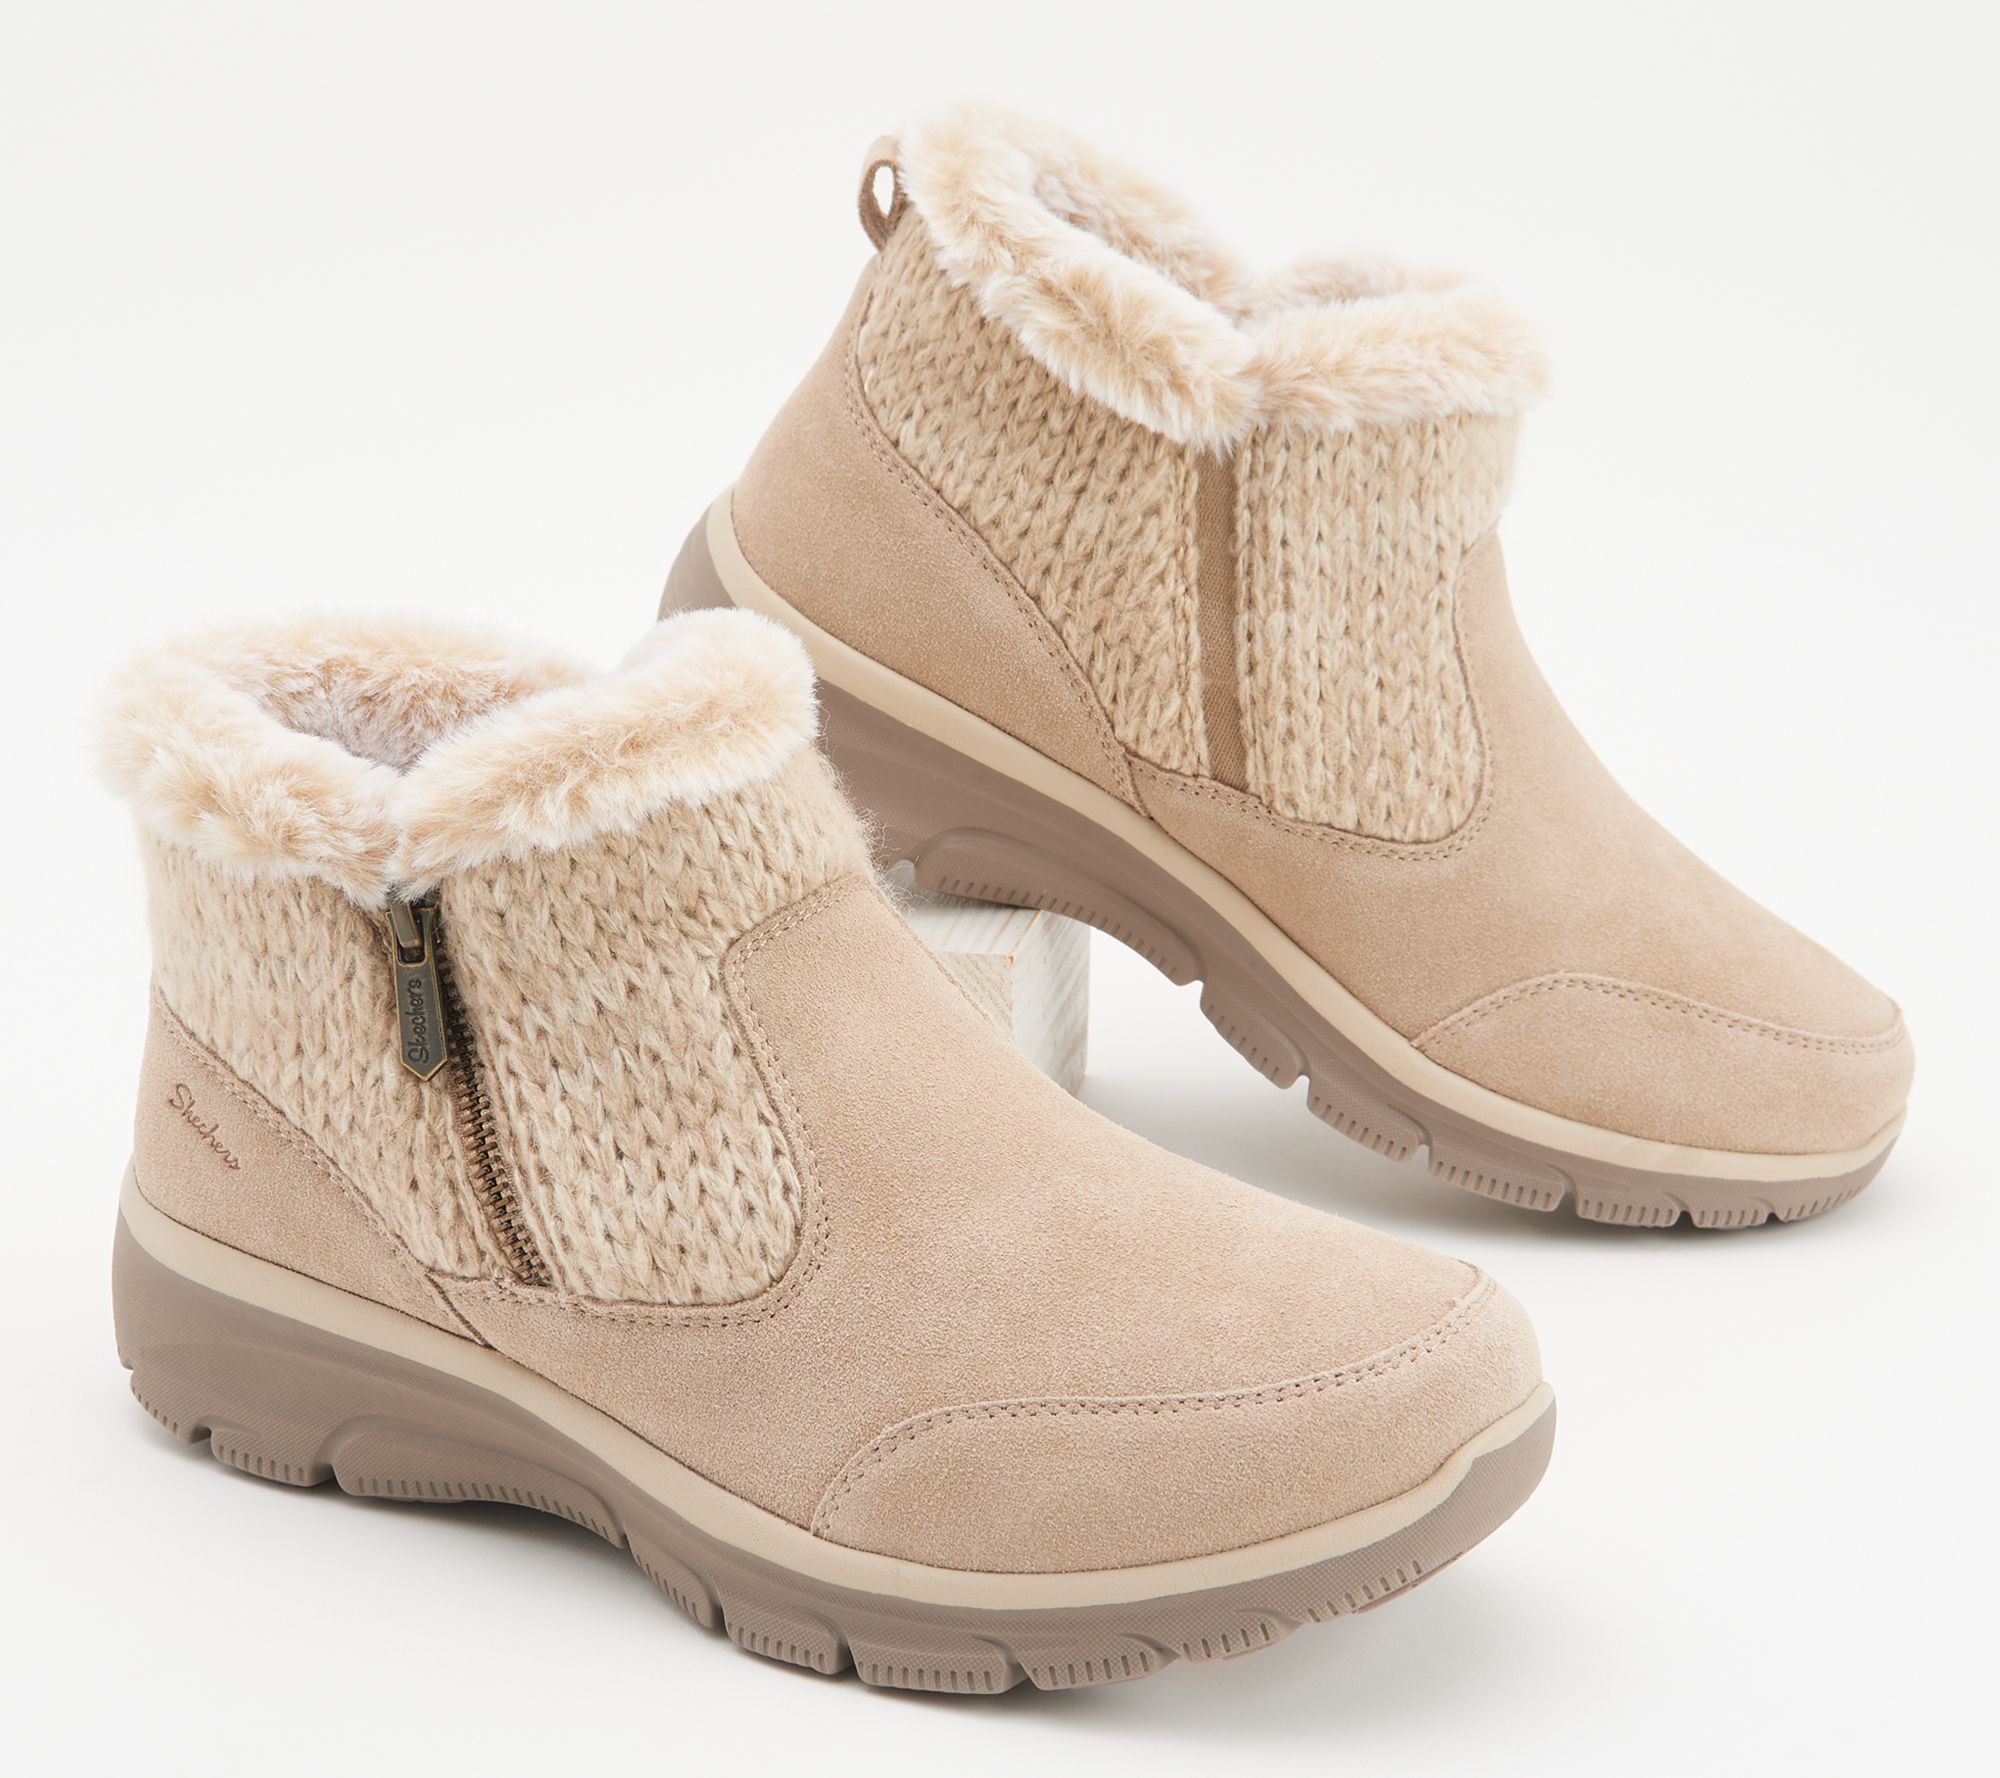 Skechers Easy Going Sweater Knit Boots - Warmhearted - QVC.com